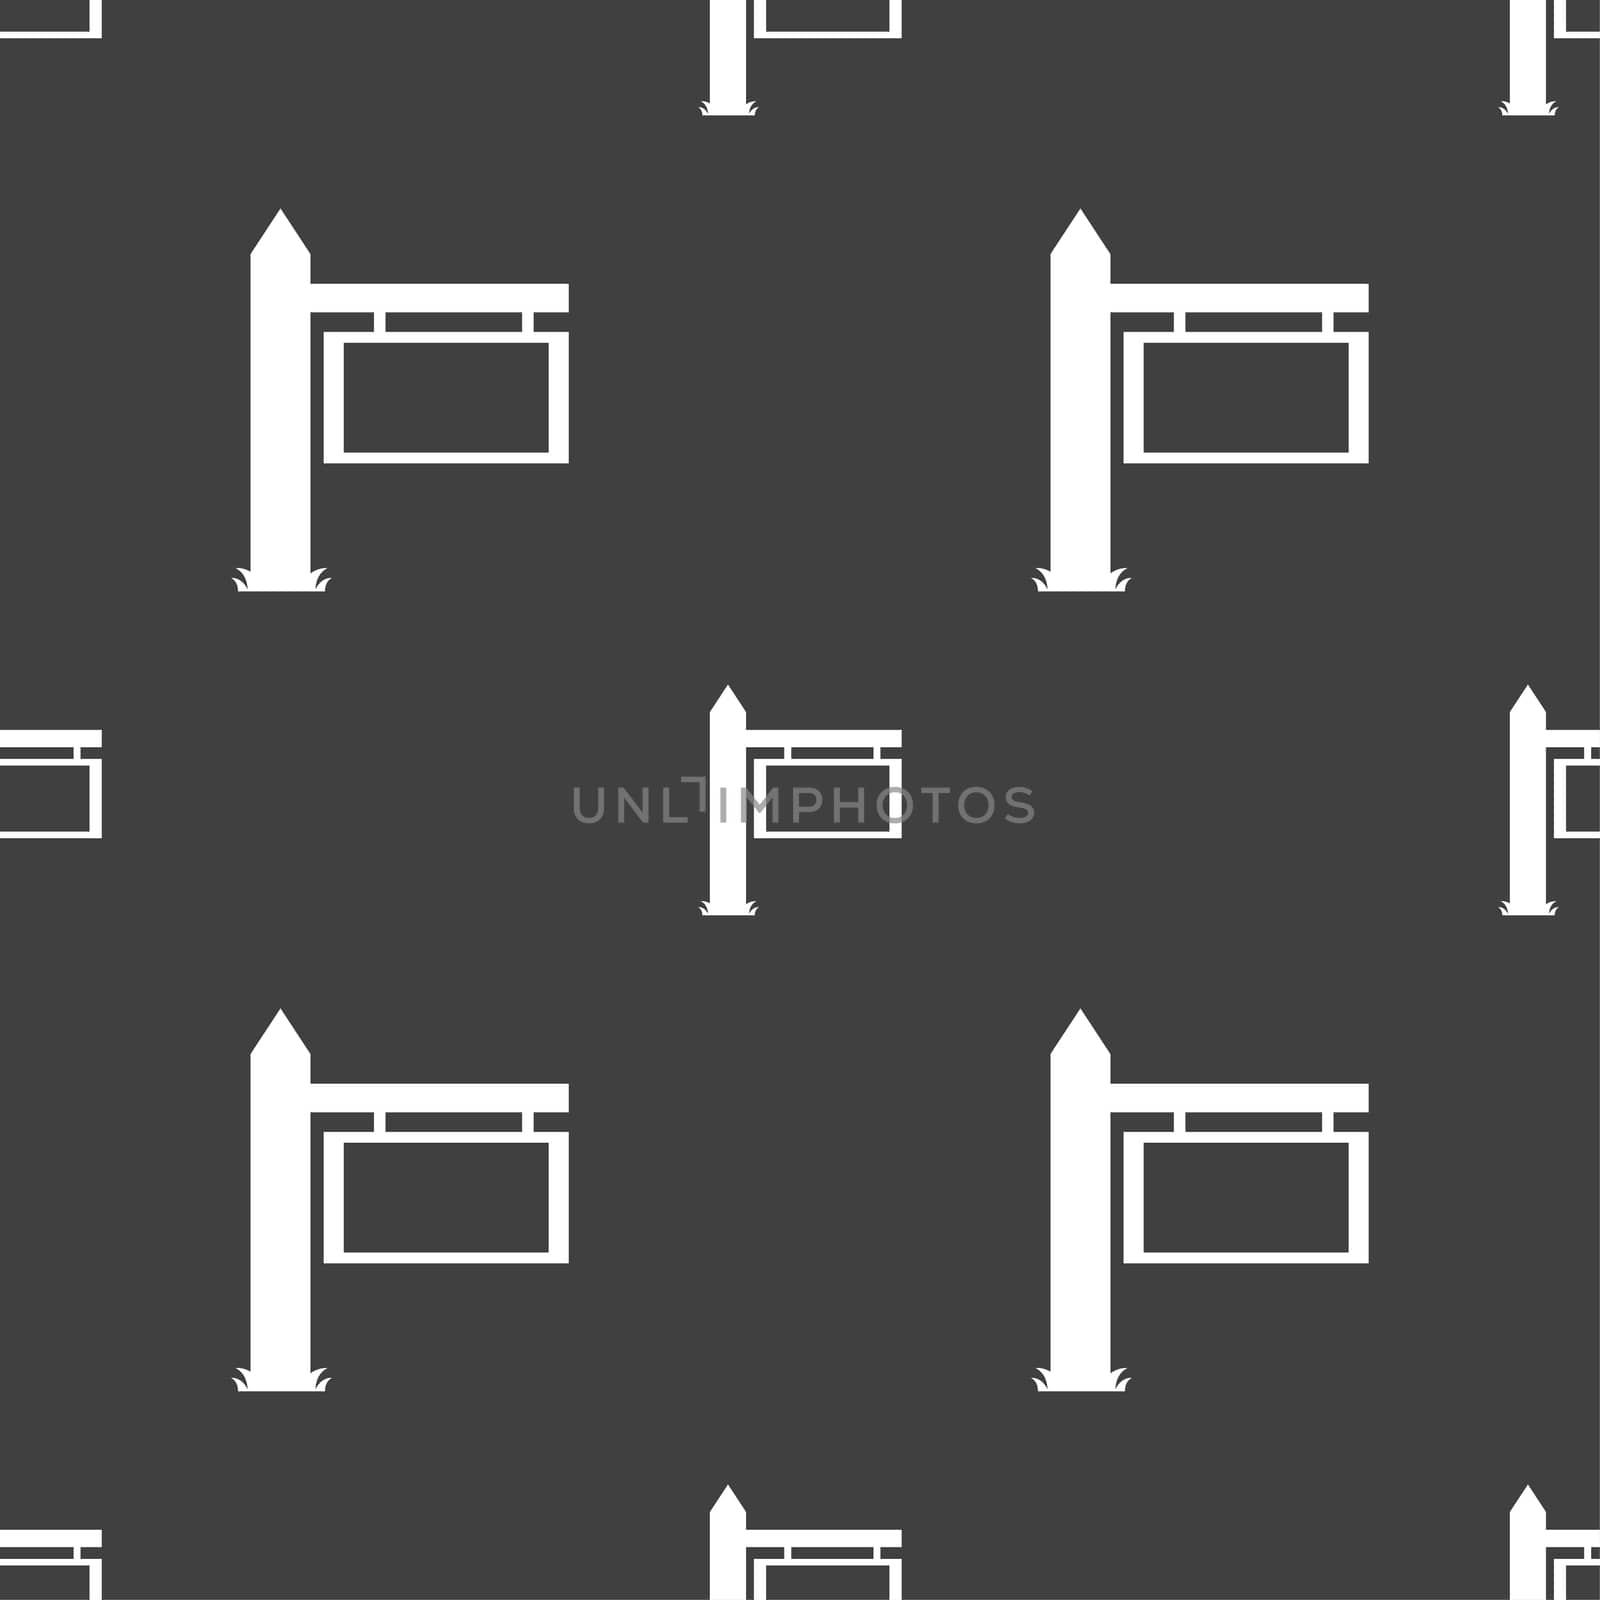 Information Road Sign icon sign. Seamless pattern on a gray background. illustration